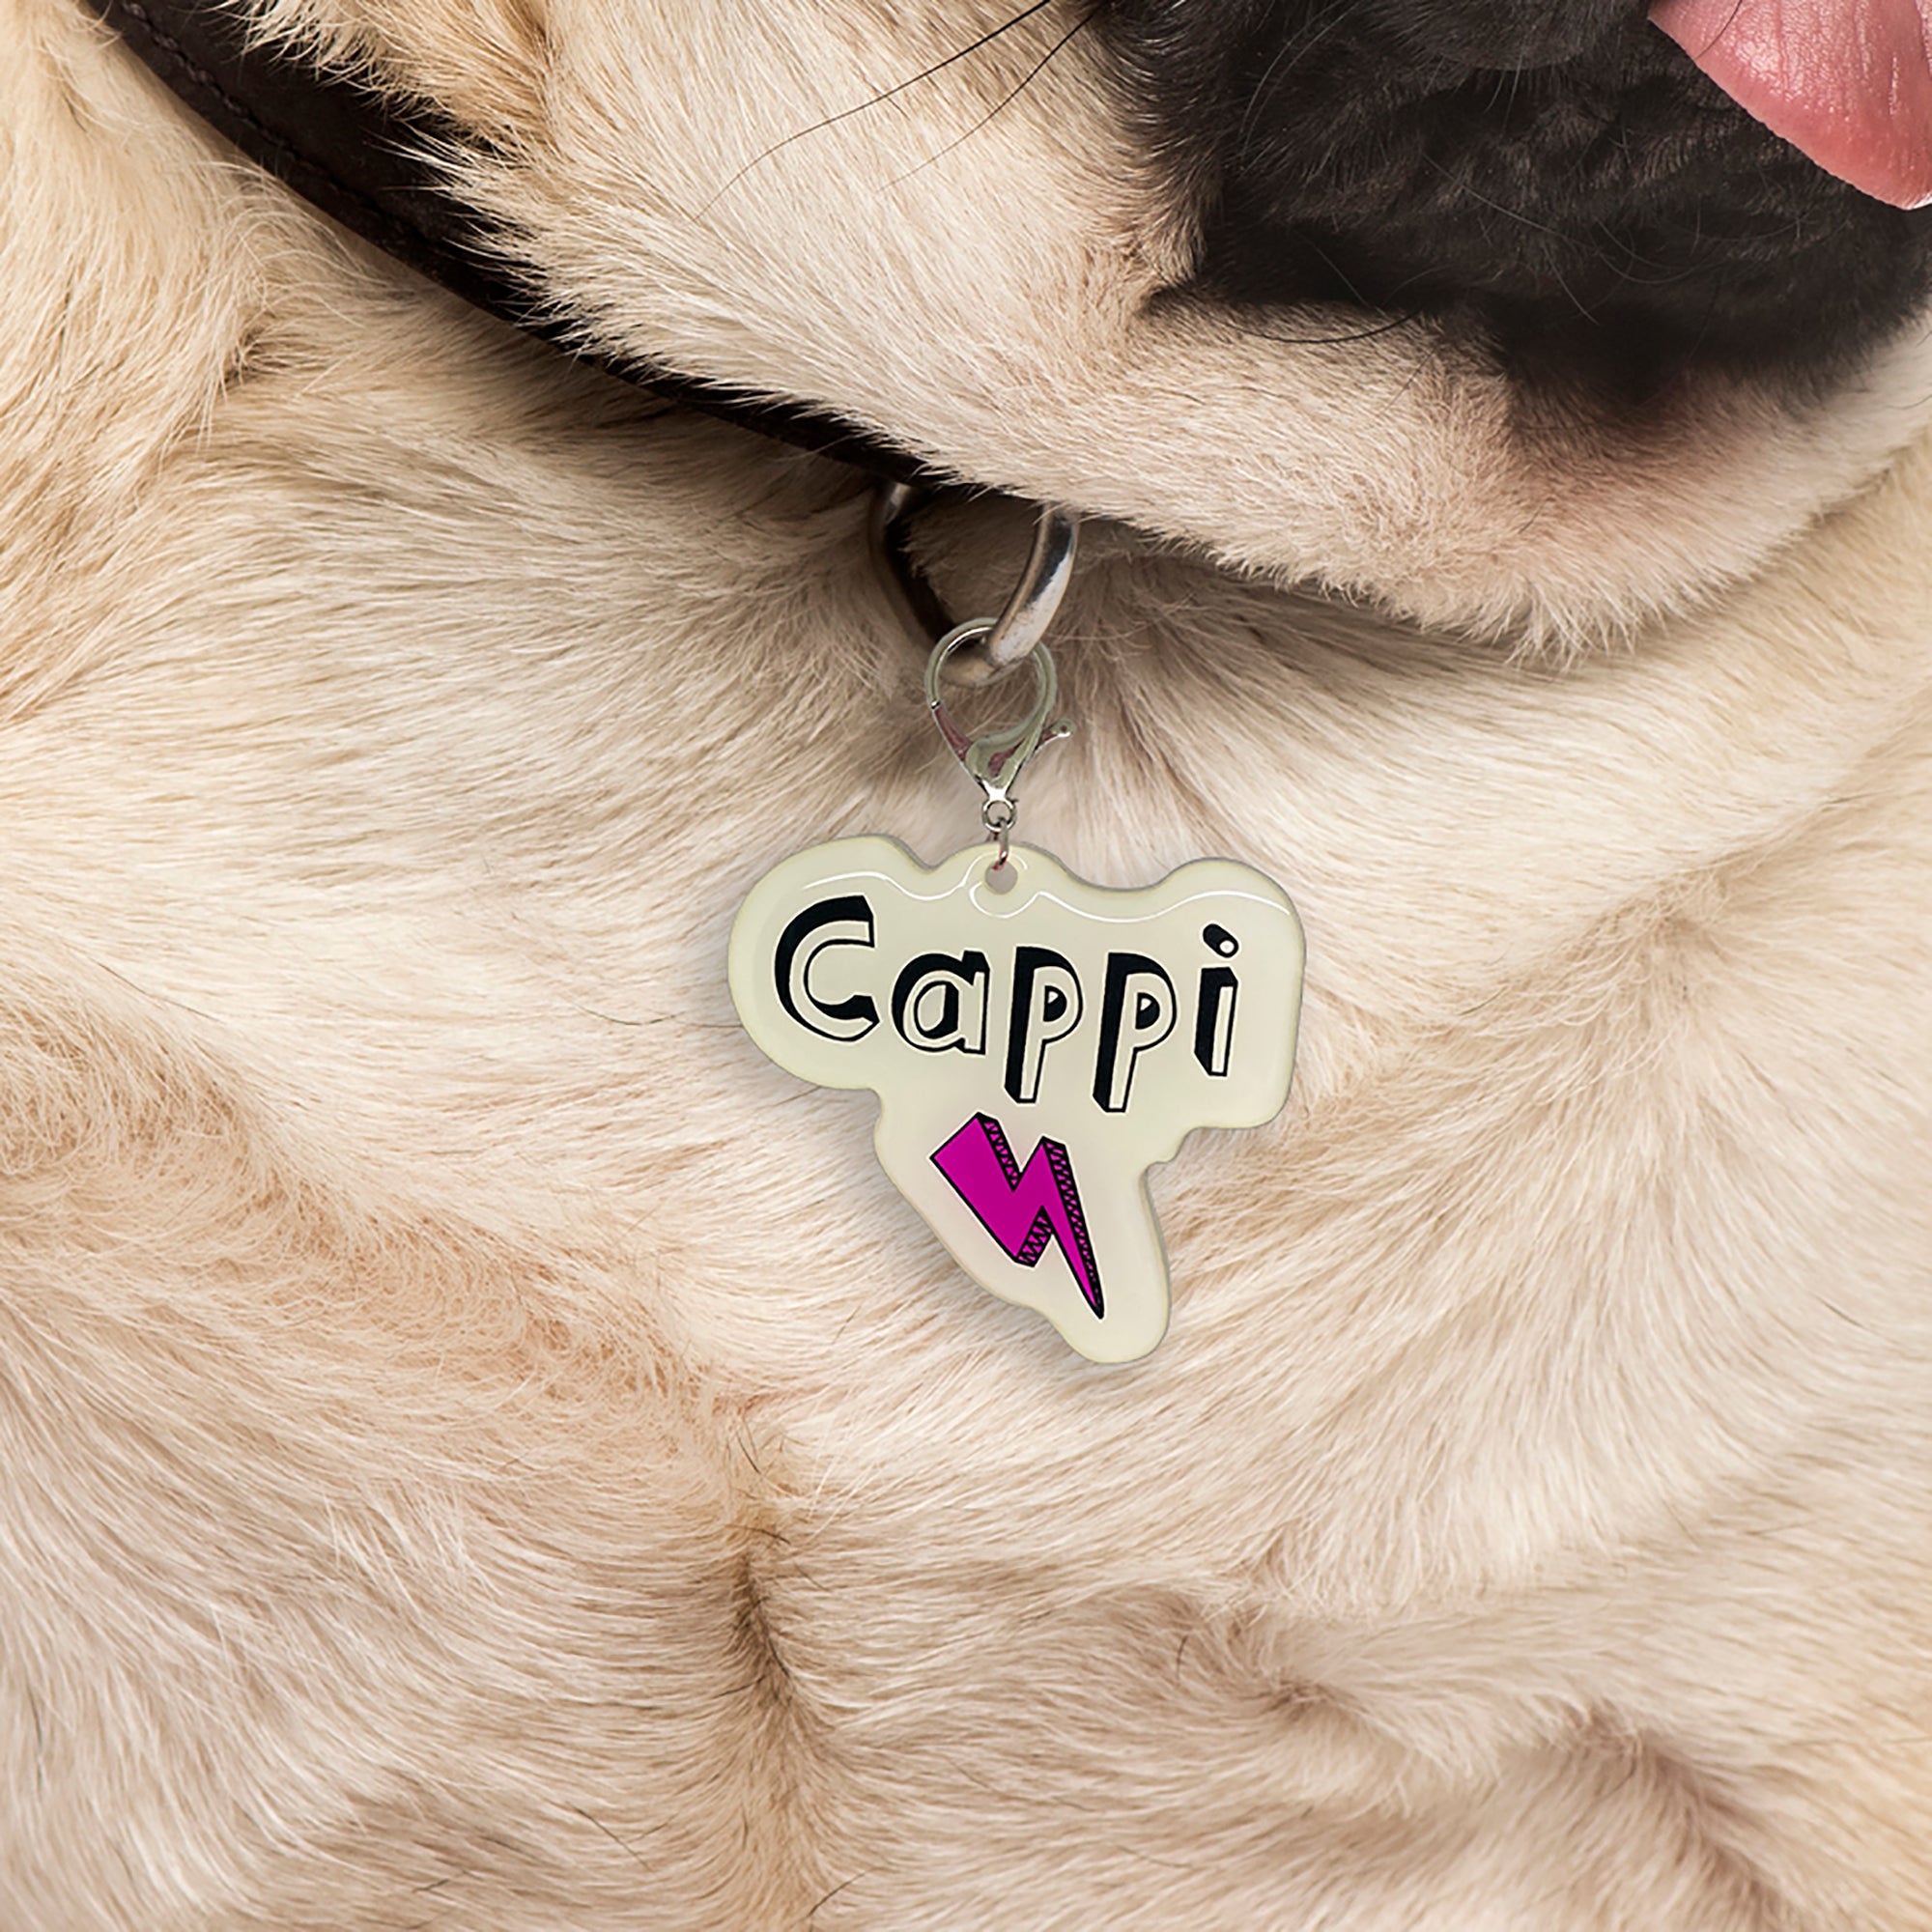 Linen + Magenta Lightning Bolt - 2x Tags Dog Name Tags by Bashtags